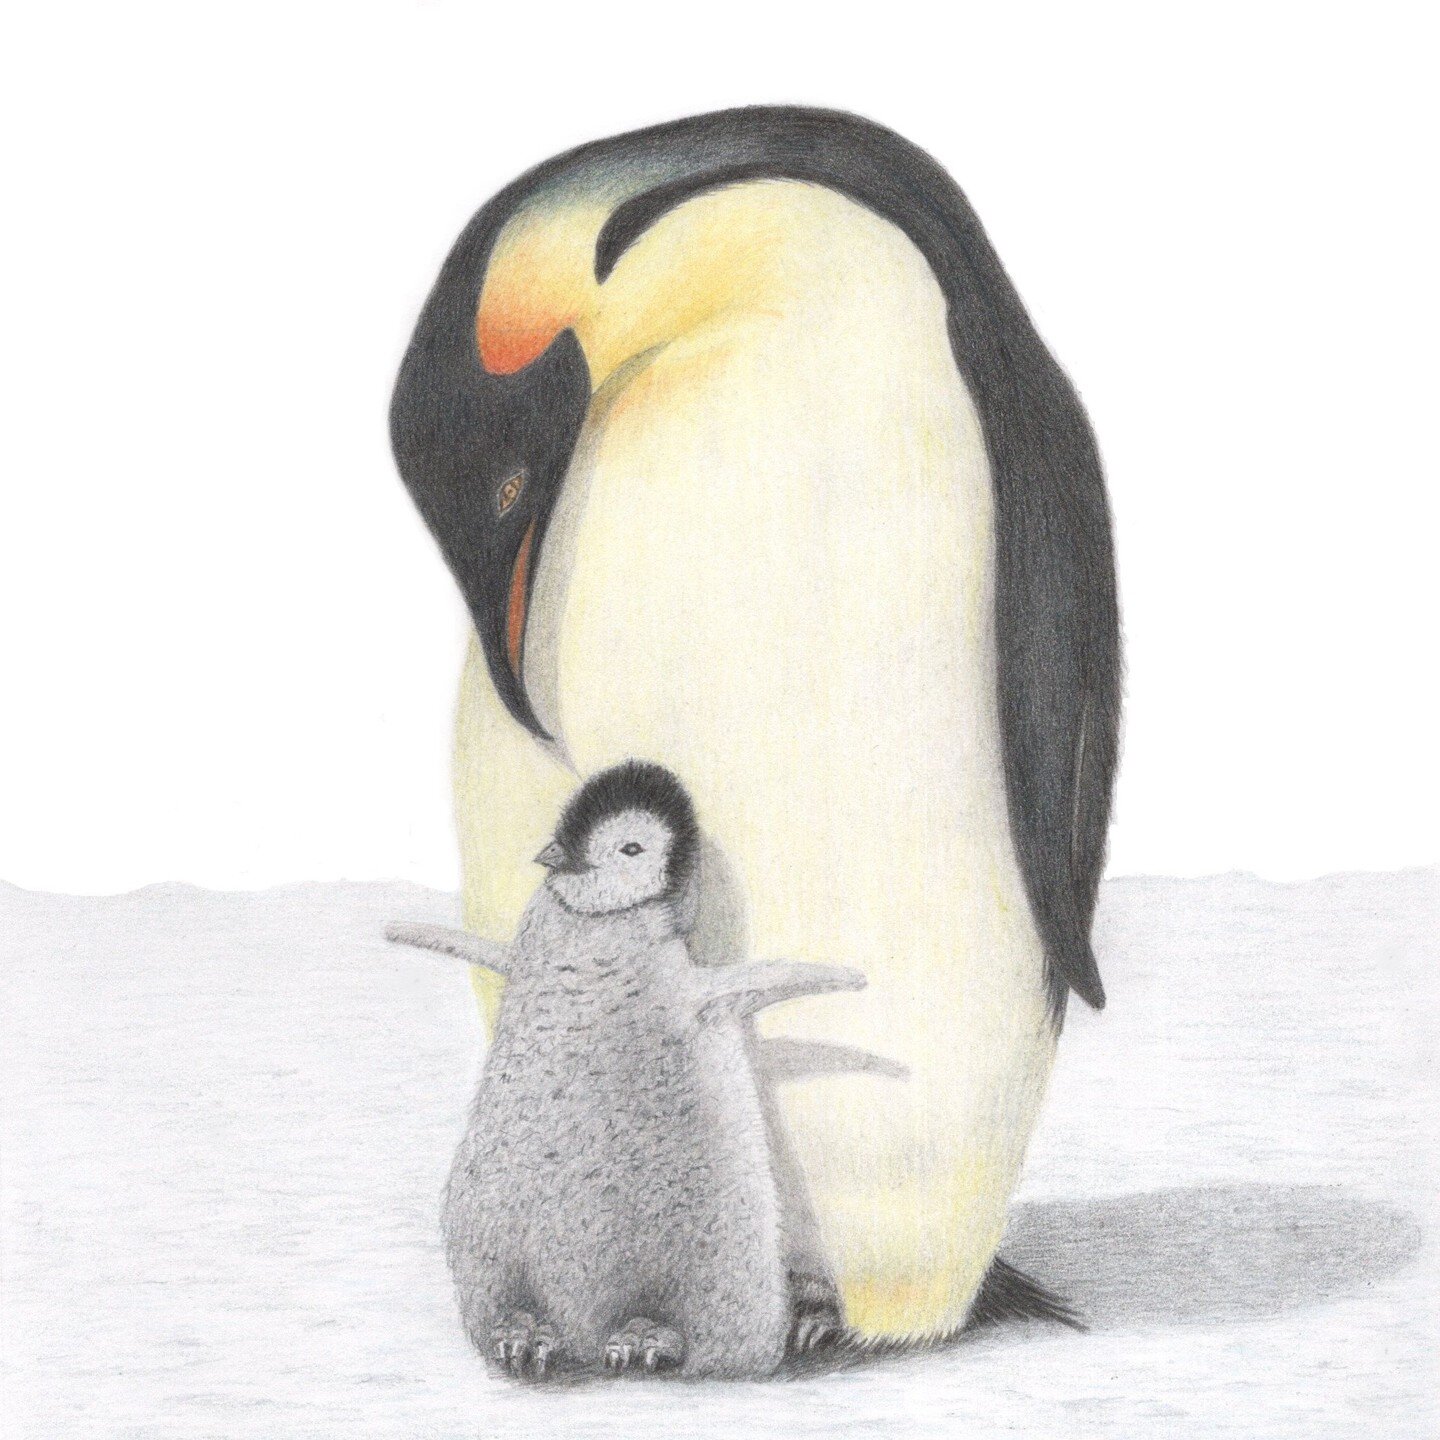 I was inspired to draw this after reading about the dangers penguins are facing due to climate change and over fishing.

Did you know you can adopt a penguin and support the work being done by The World Wildlife Fund to help penguins?
https://support